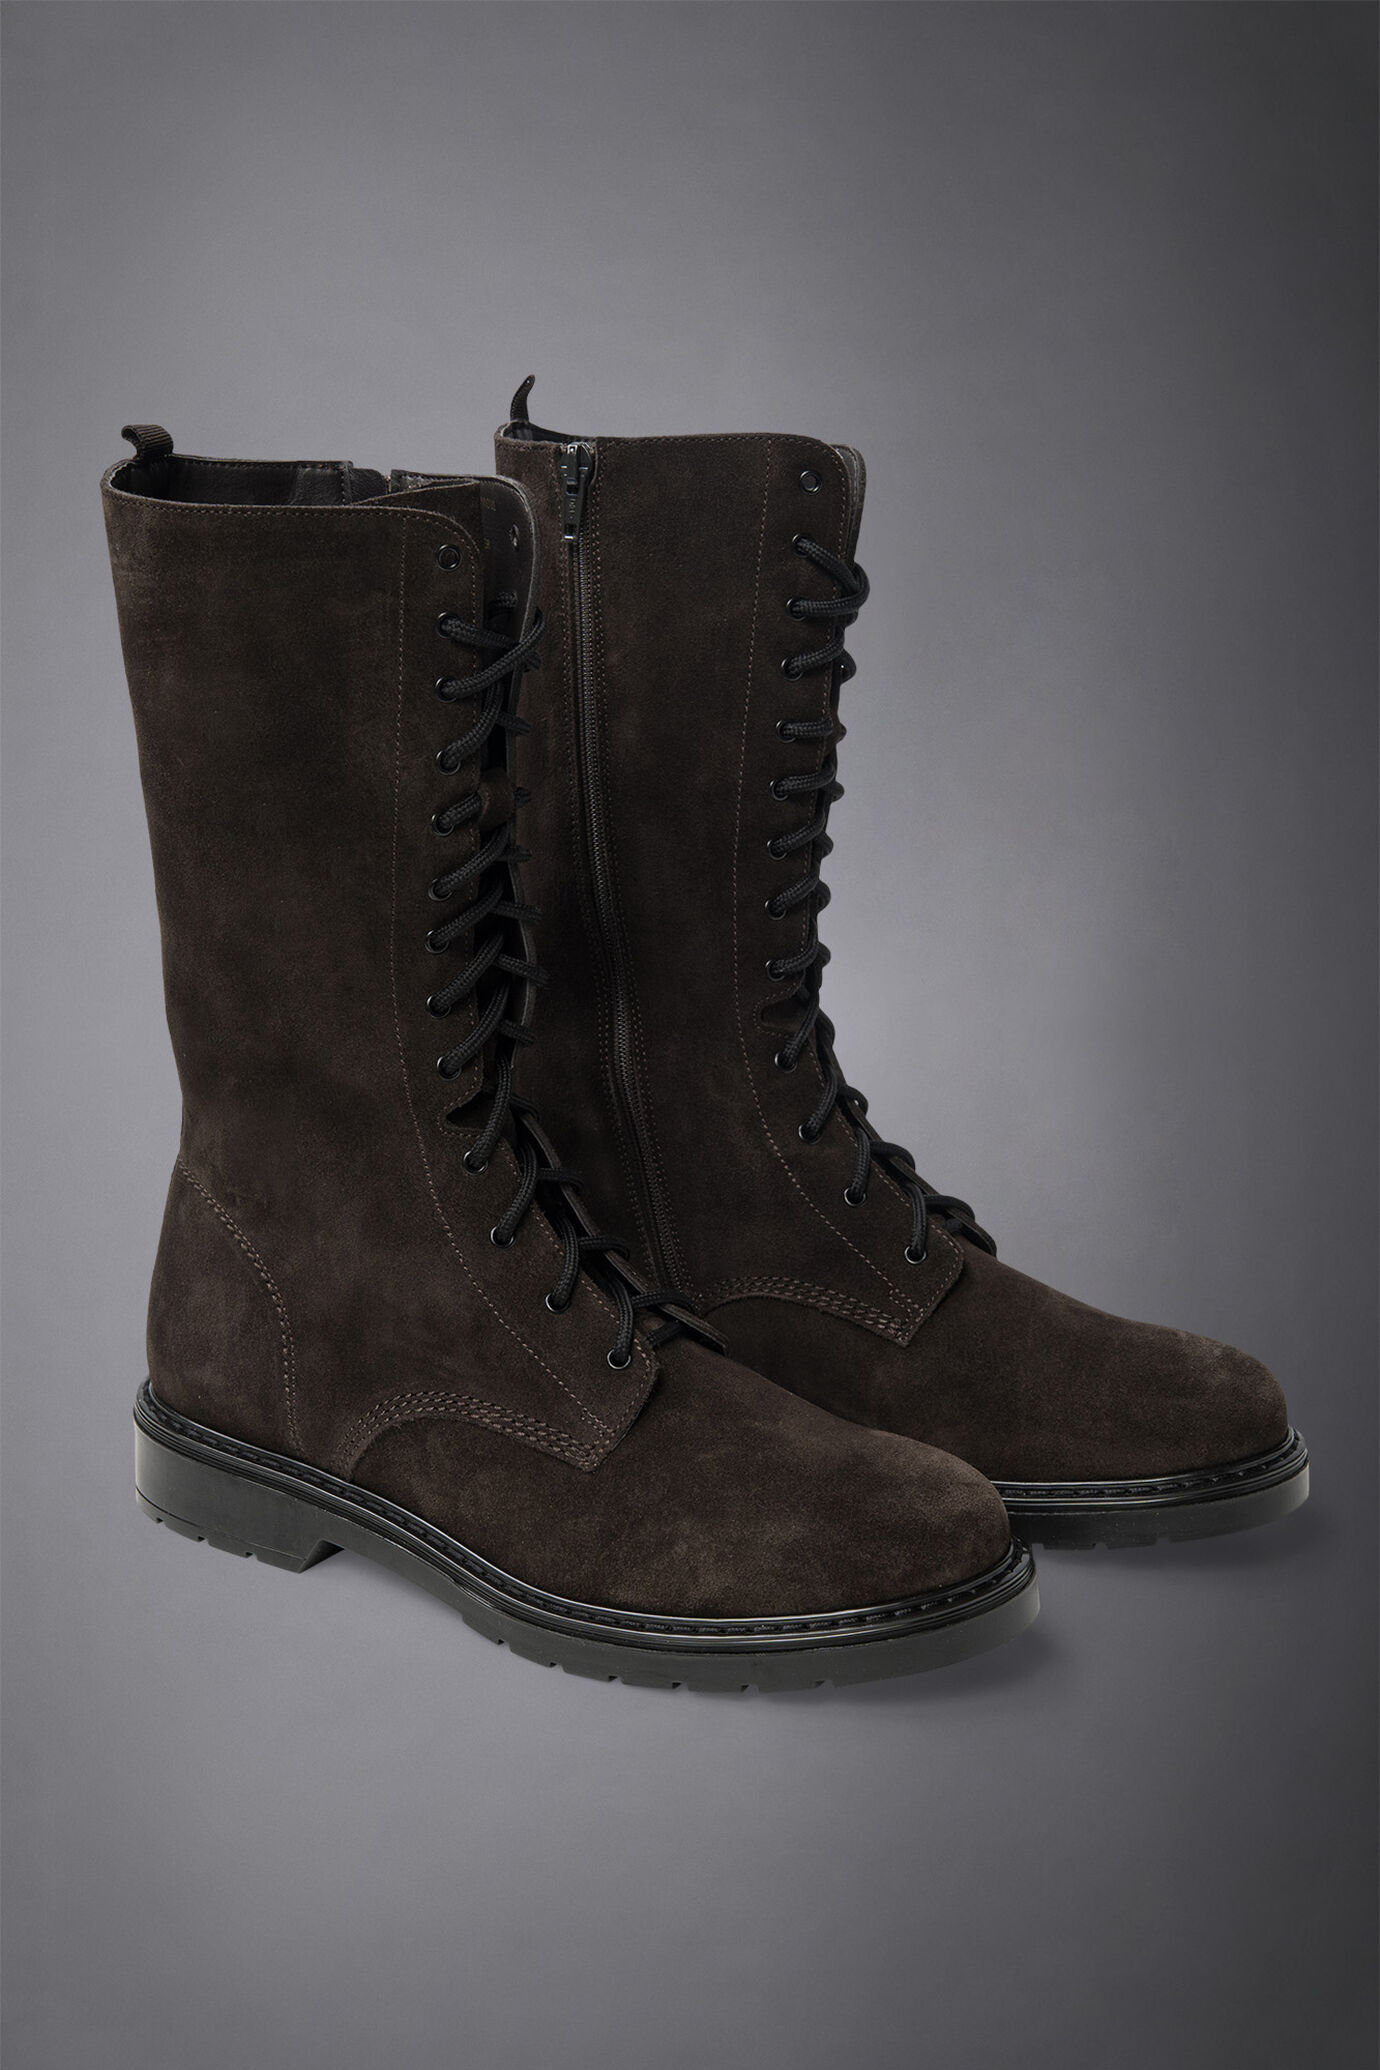 Women's amphibious boot 100% suede leather with rubber sole